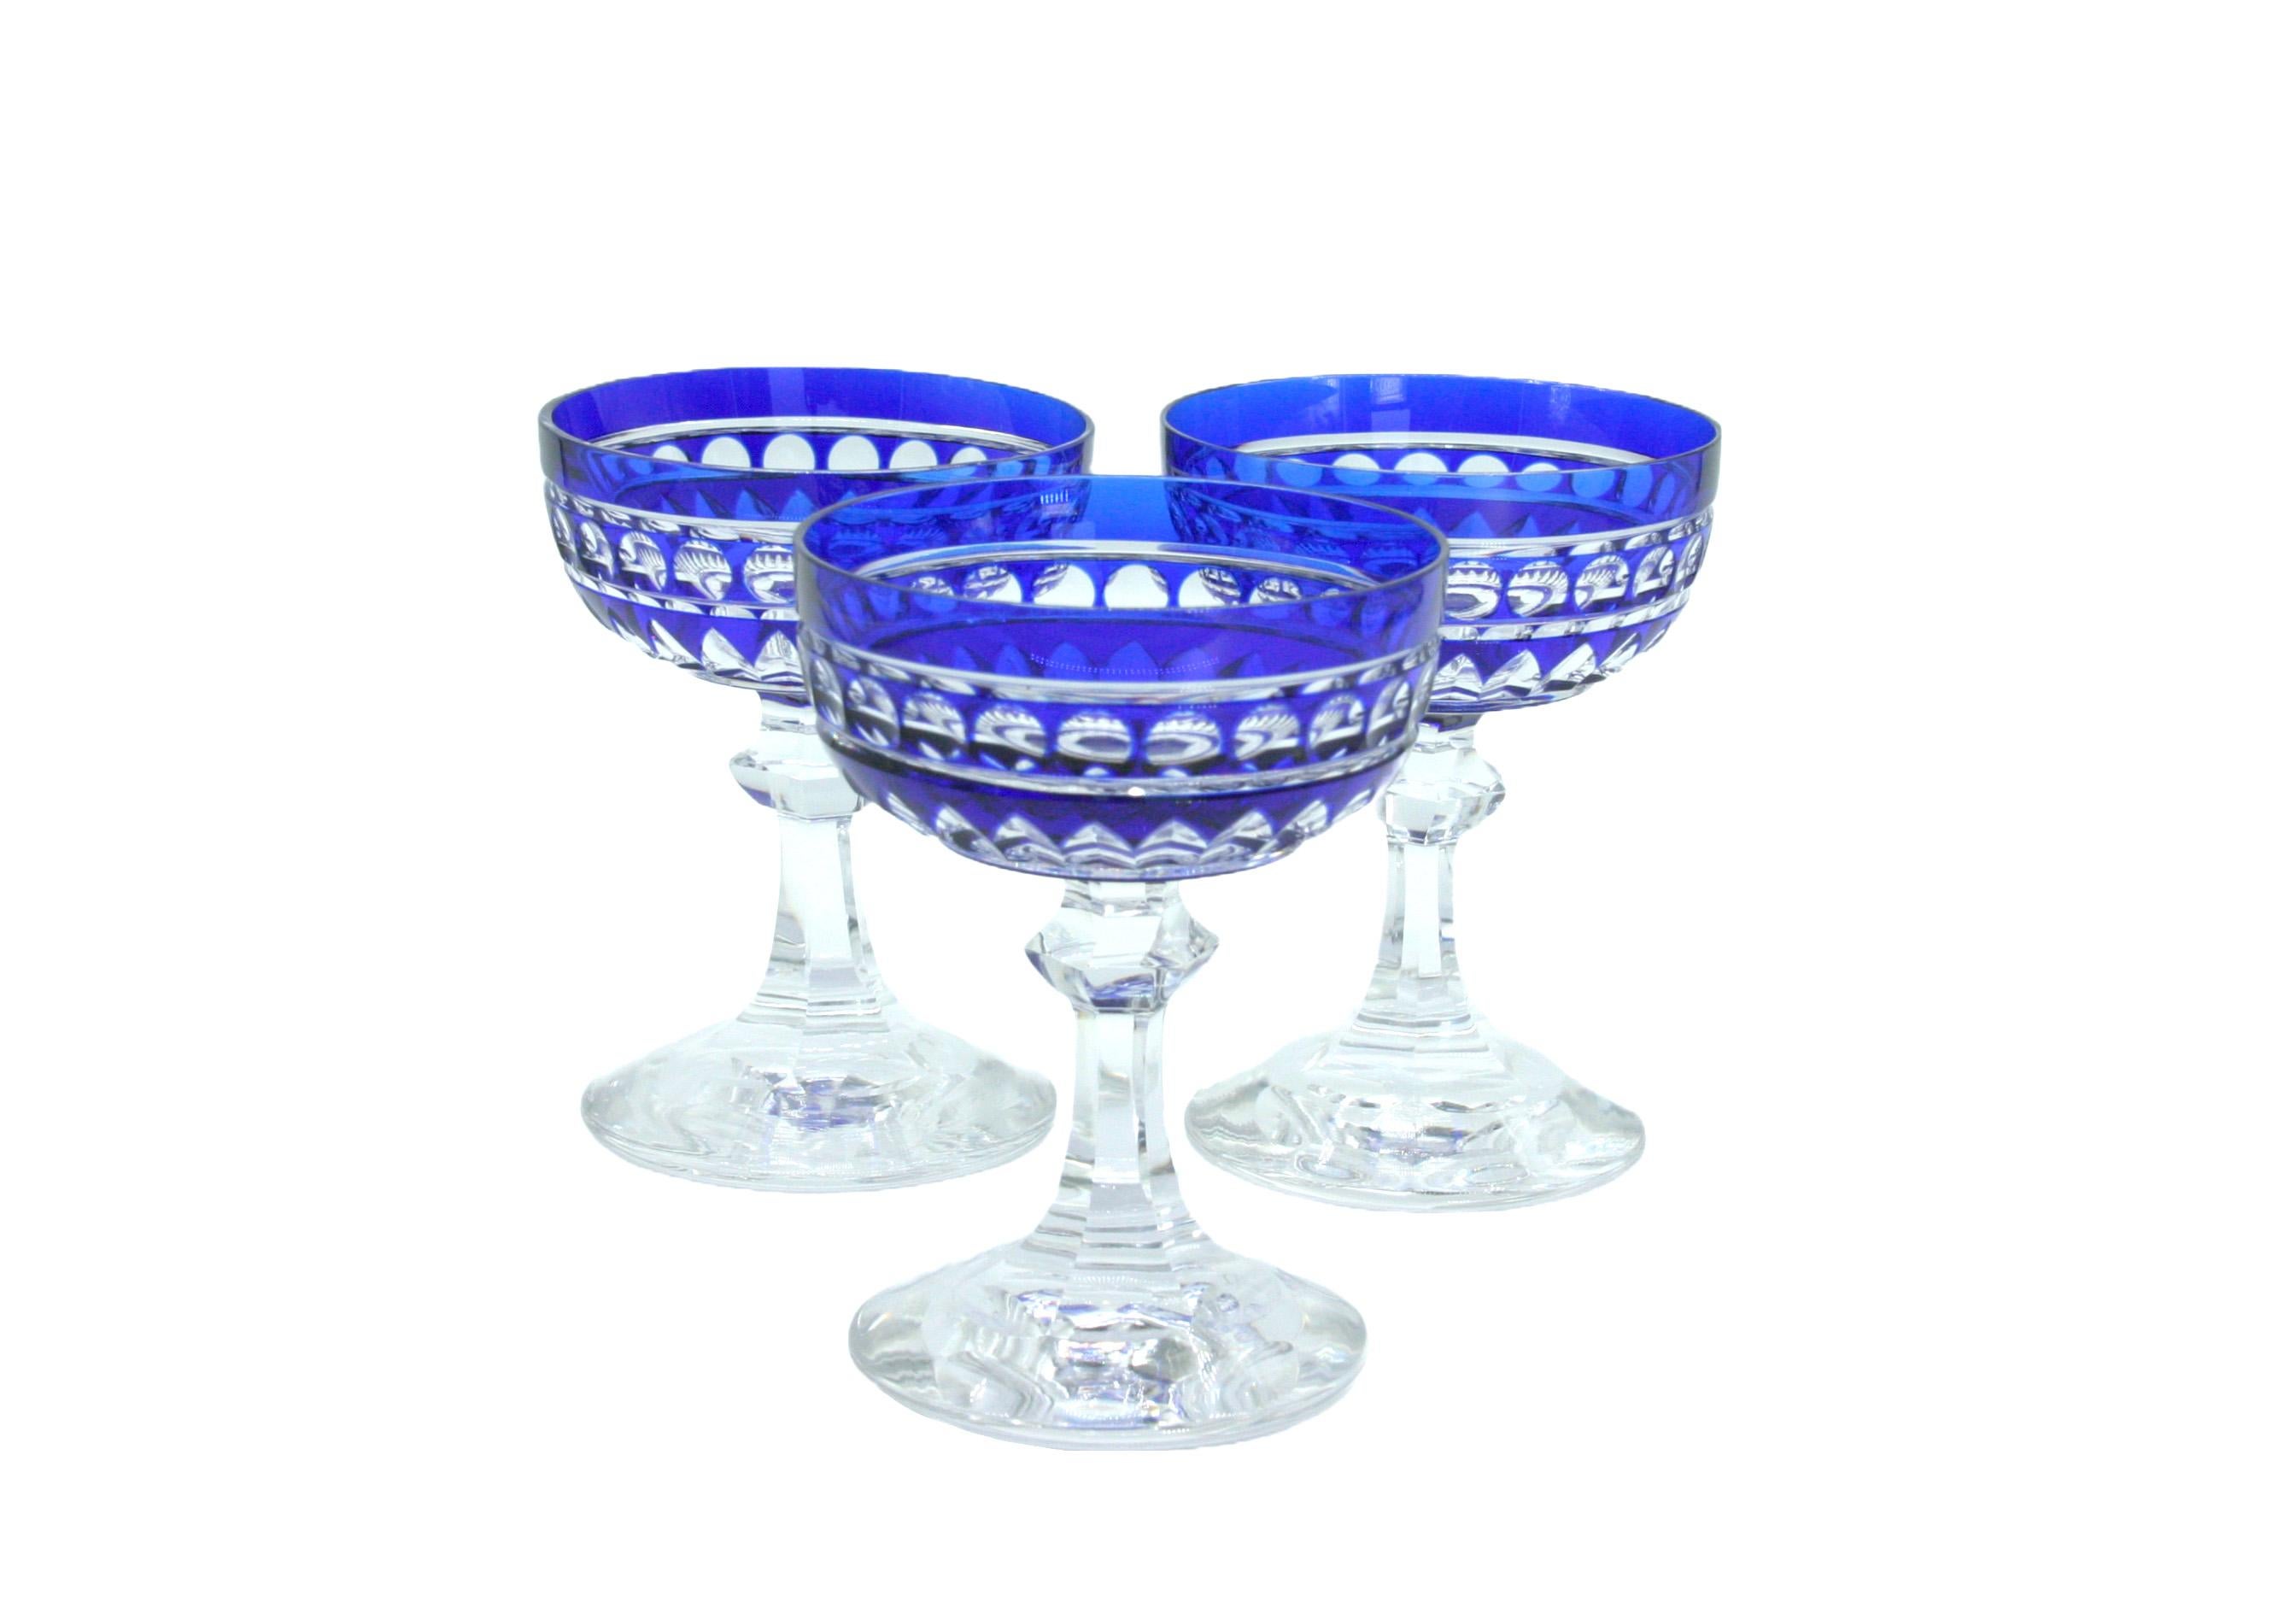 Exquisite set of Val Saint Lambert barware / tableware cobalt blue crystal coupe service for 9 people . Val crystal is regarded as some of the most magnificent ever made and renowned for their exquisite color. This exquisite cut to clear crystal